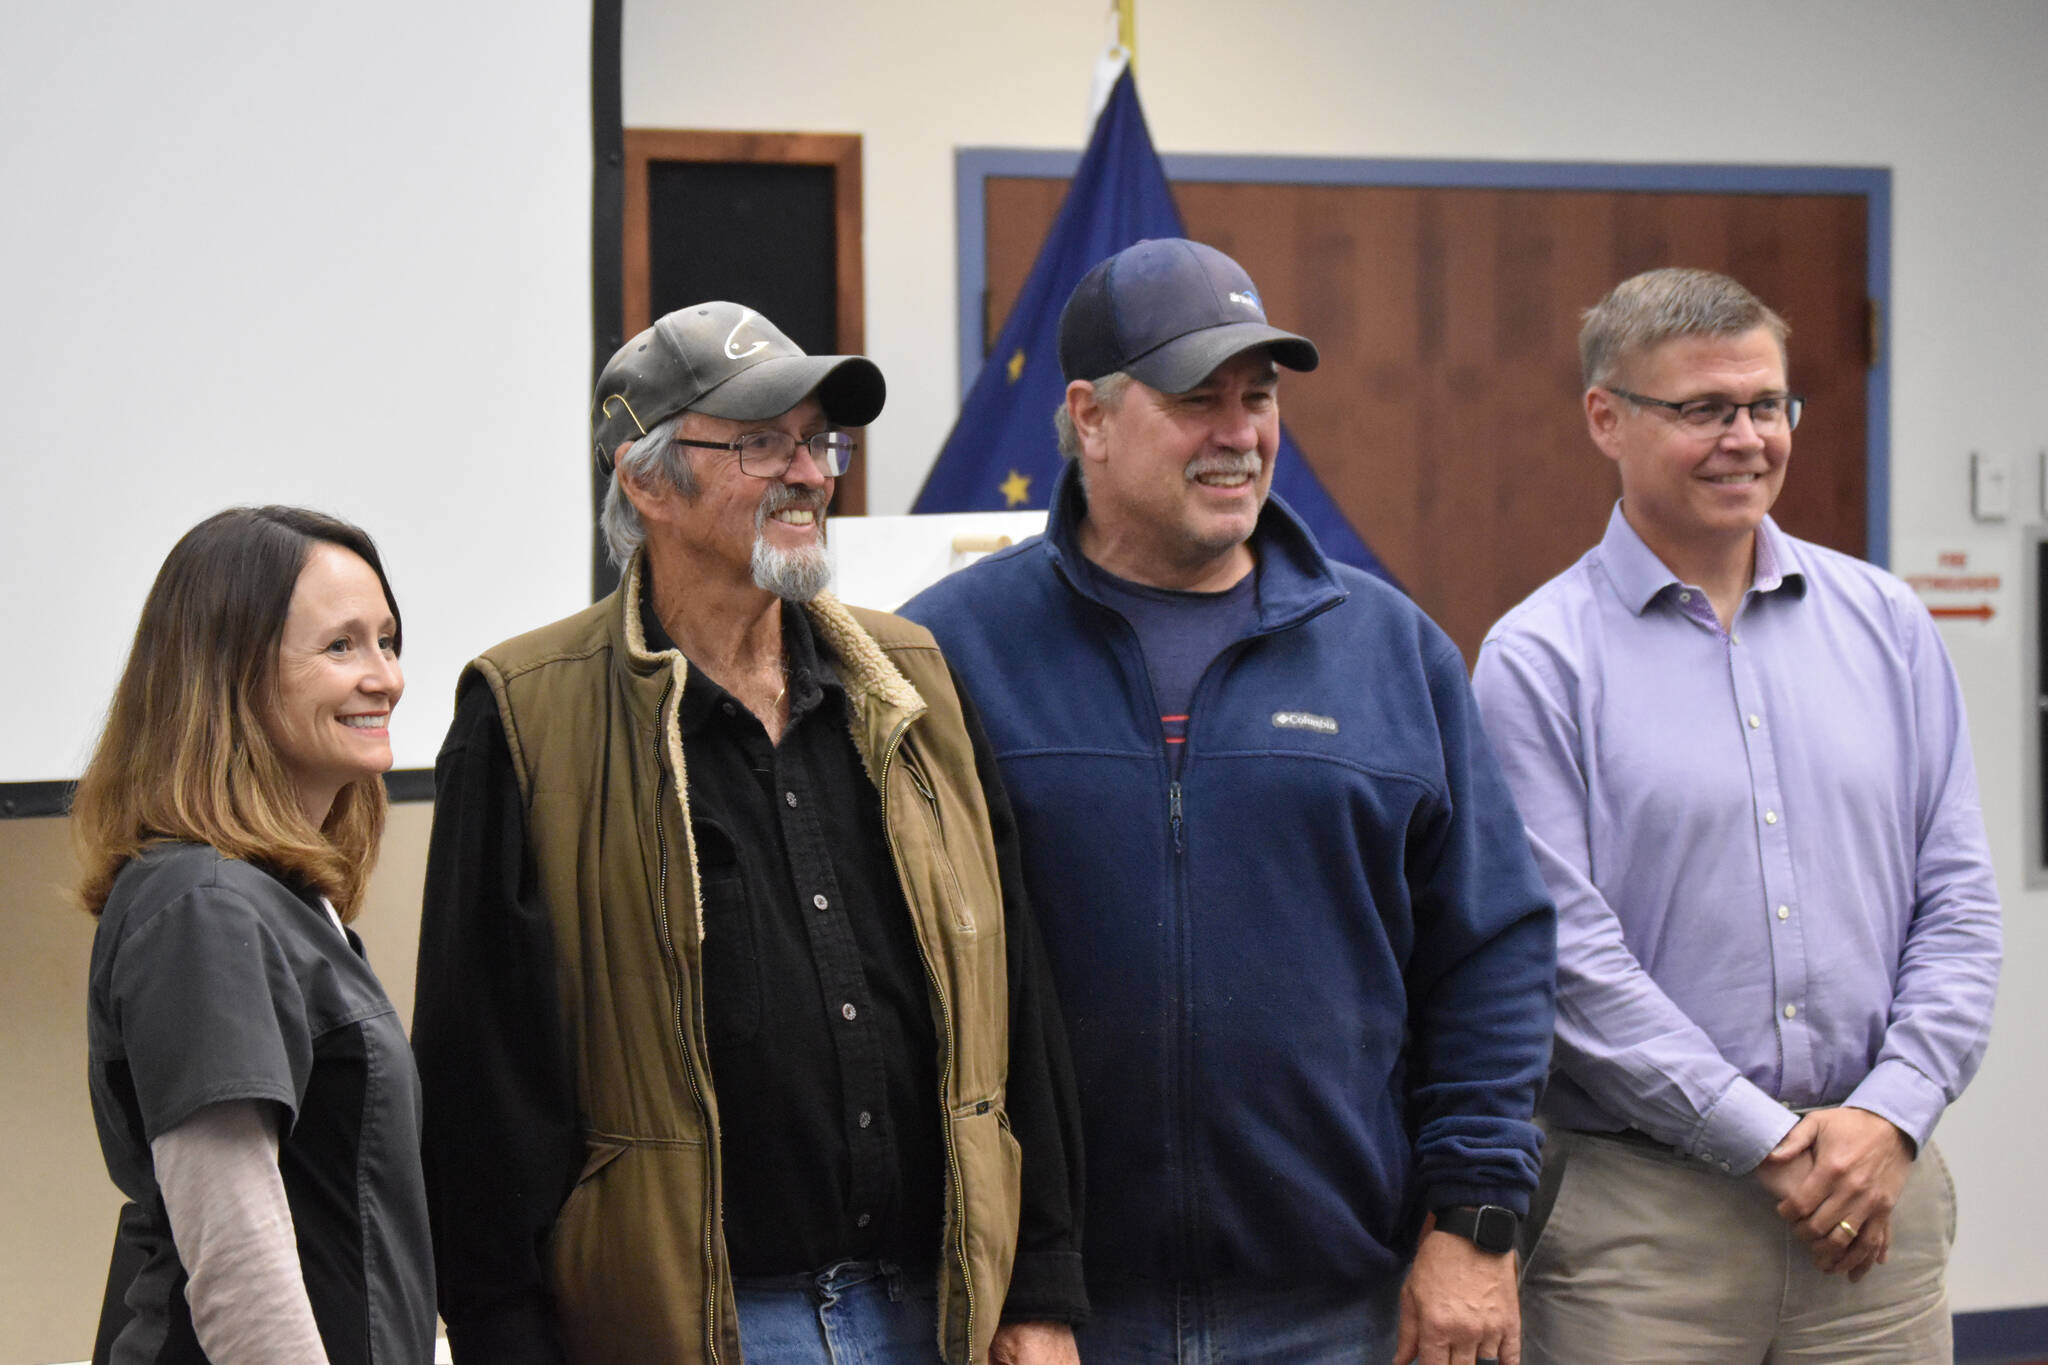 Dr. Katy Rice, Ronald Duval, Brian Gabriel and Paul Ostrander stand for photos at the closing ceremony of the Kenai Silver Salmon Derby on Monday, Sept. 19, 2022, in Kenai, Alaska. Duval won the adult division of the derby. (Jake Dye/Peninsula Clarion)